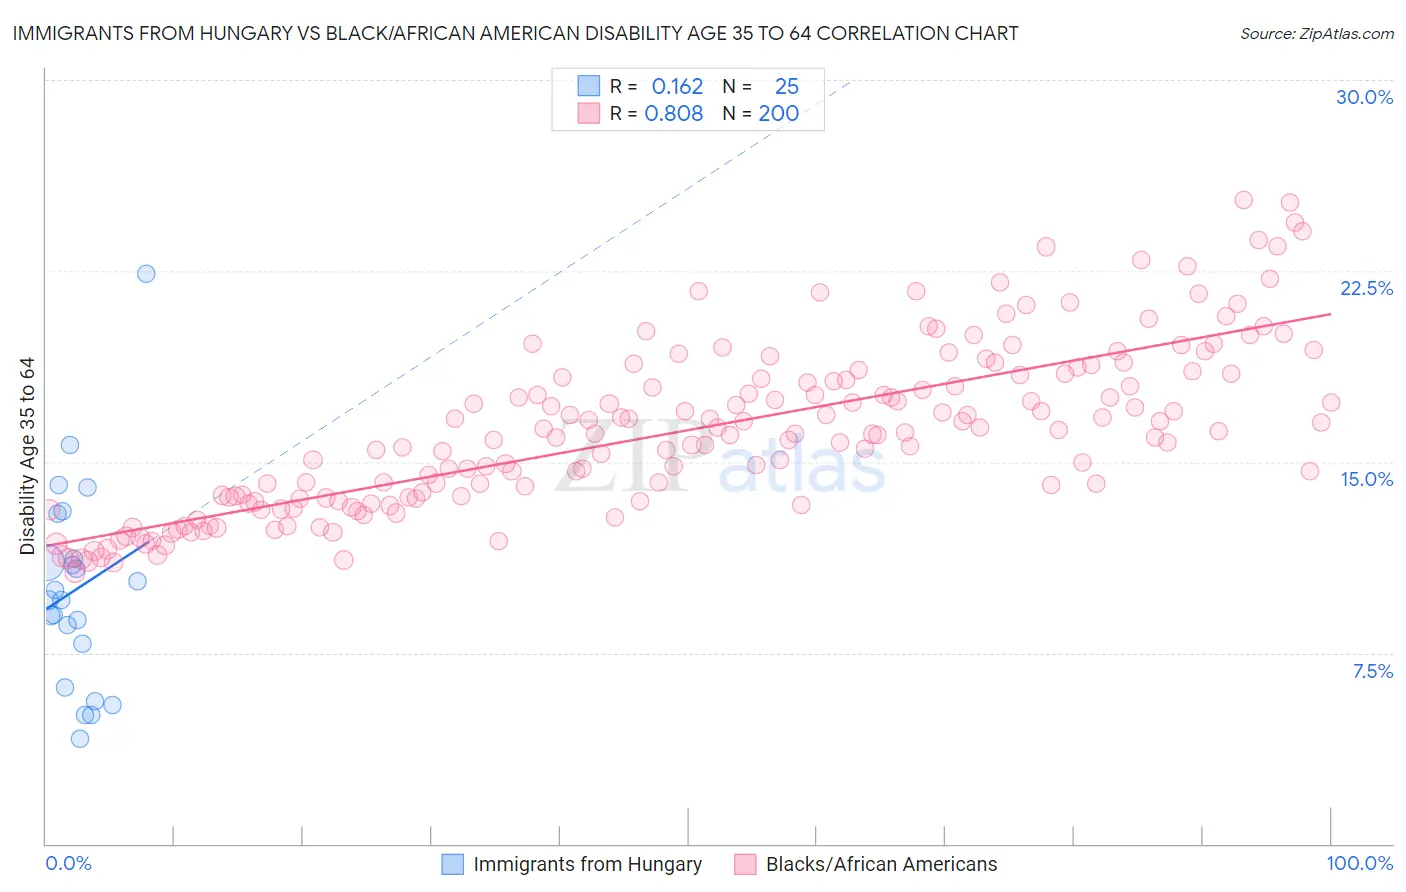 Immigrants from Hungary vs Black/African American Disability Age 35 to 64